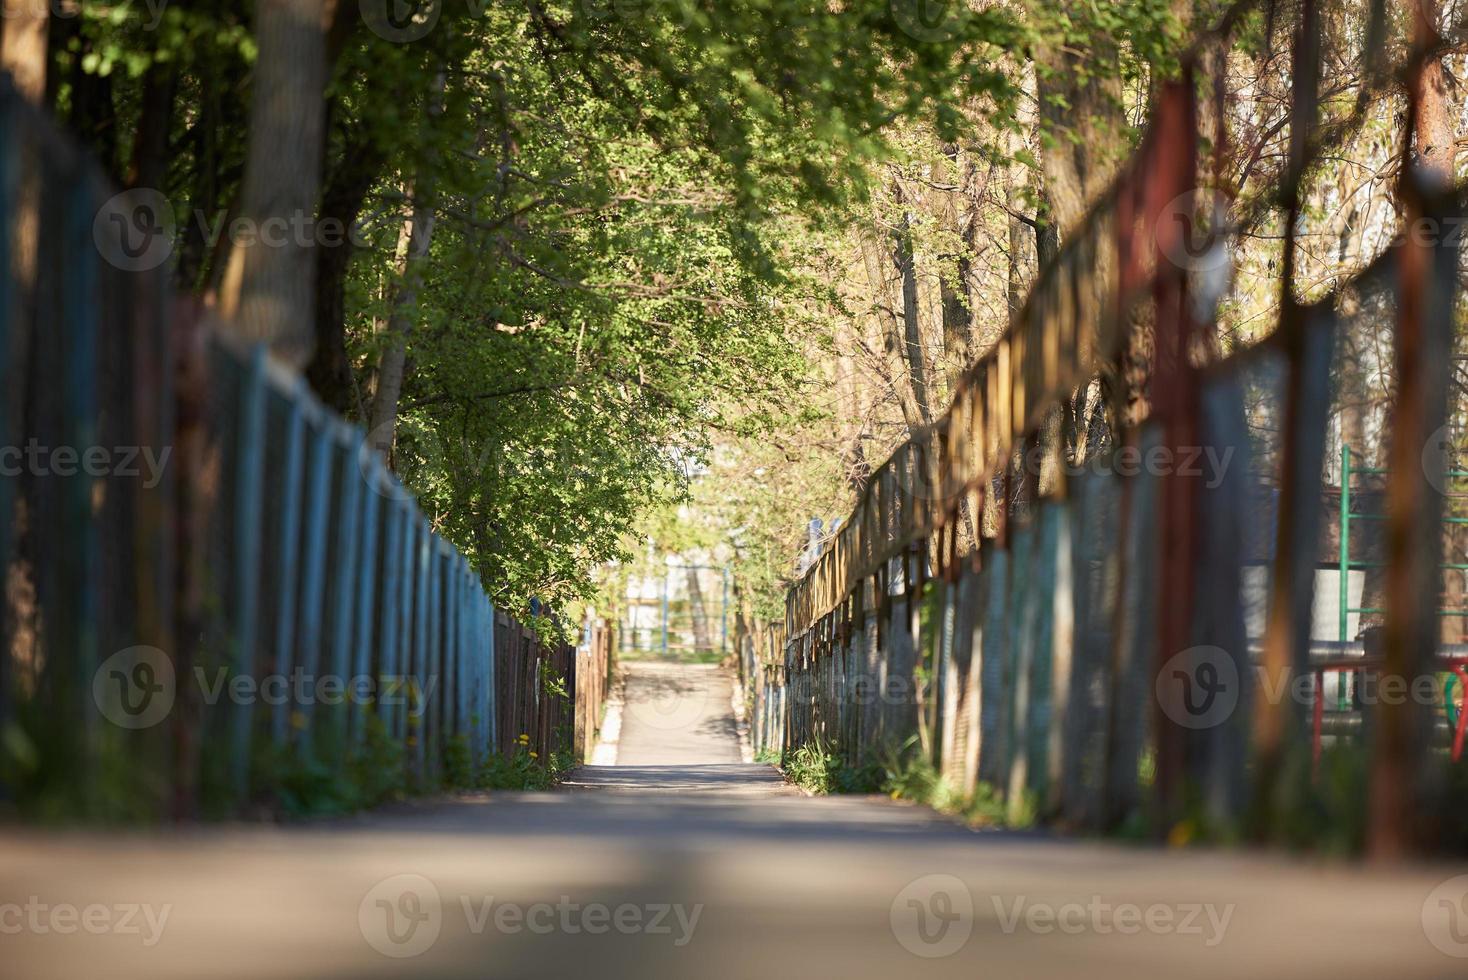 The path between the fences goes into the distance. A sunny day in the park. Foreground and background in blur. photo